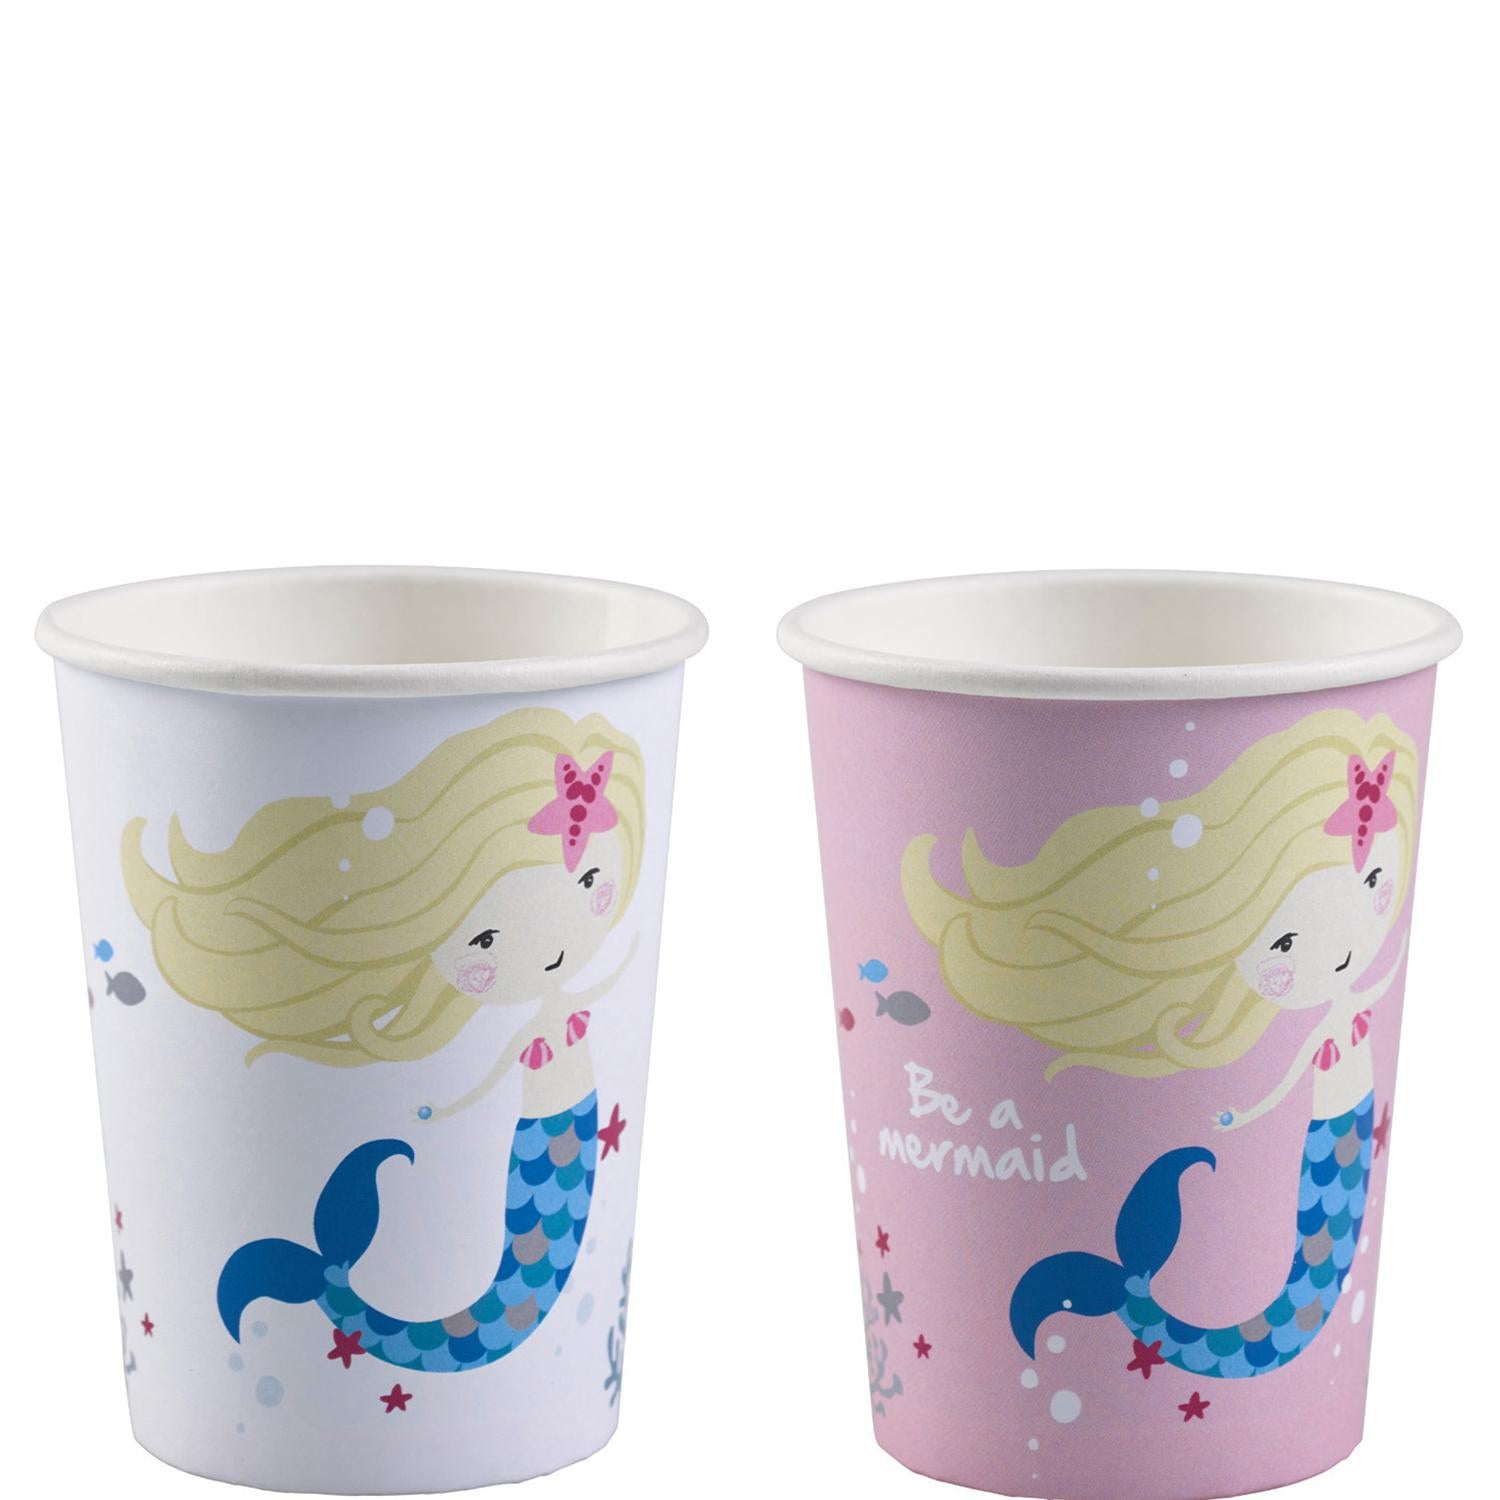 Be A Mermaid Paper Cups 8oz, 8pcs Printed Tableware - Party Centre